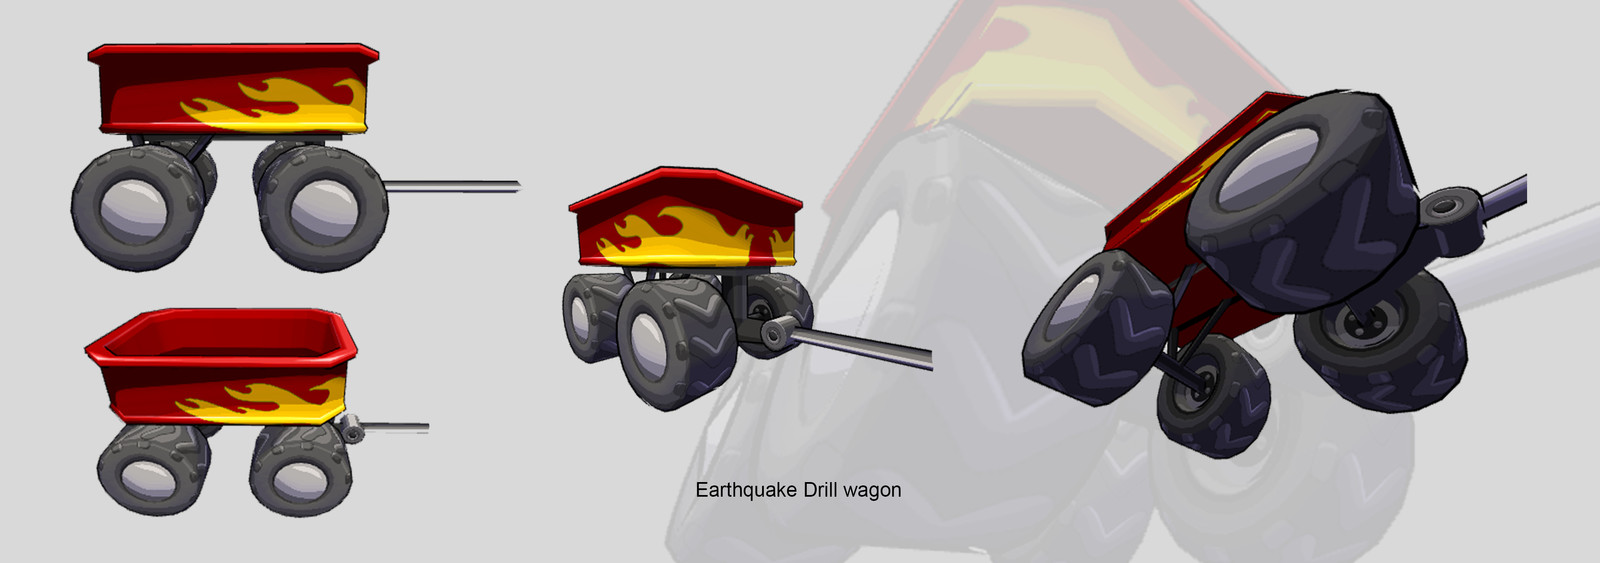 Earthquake drill wagon Model and texture